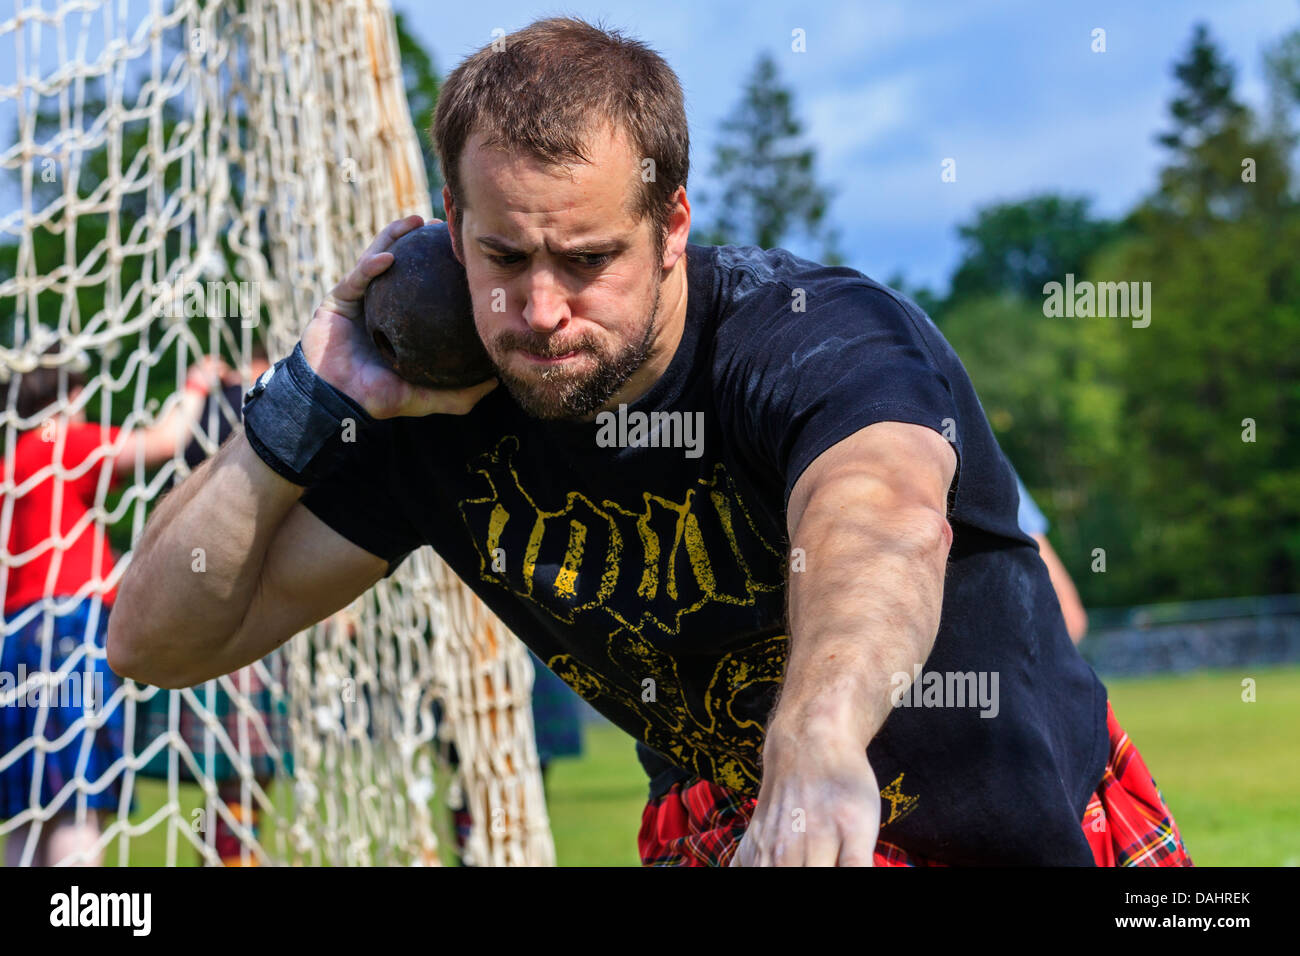 Competitor throwing the 16 pound ball in the traditional Scottish competition at the Highland Games, Stock Photo